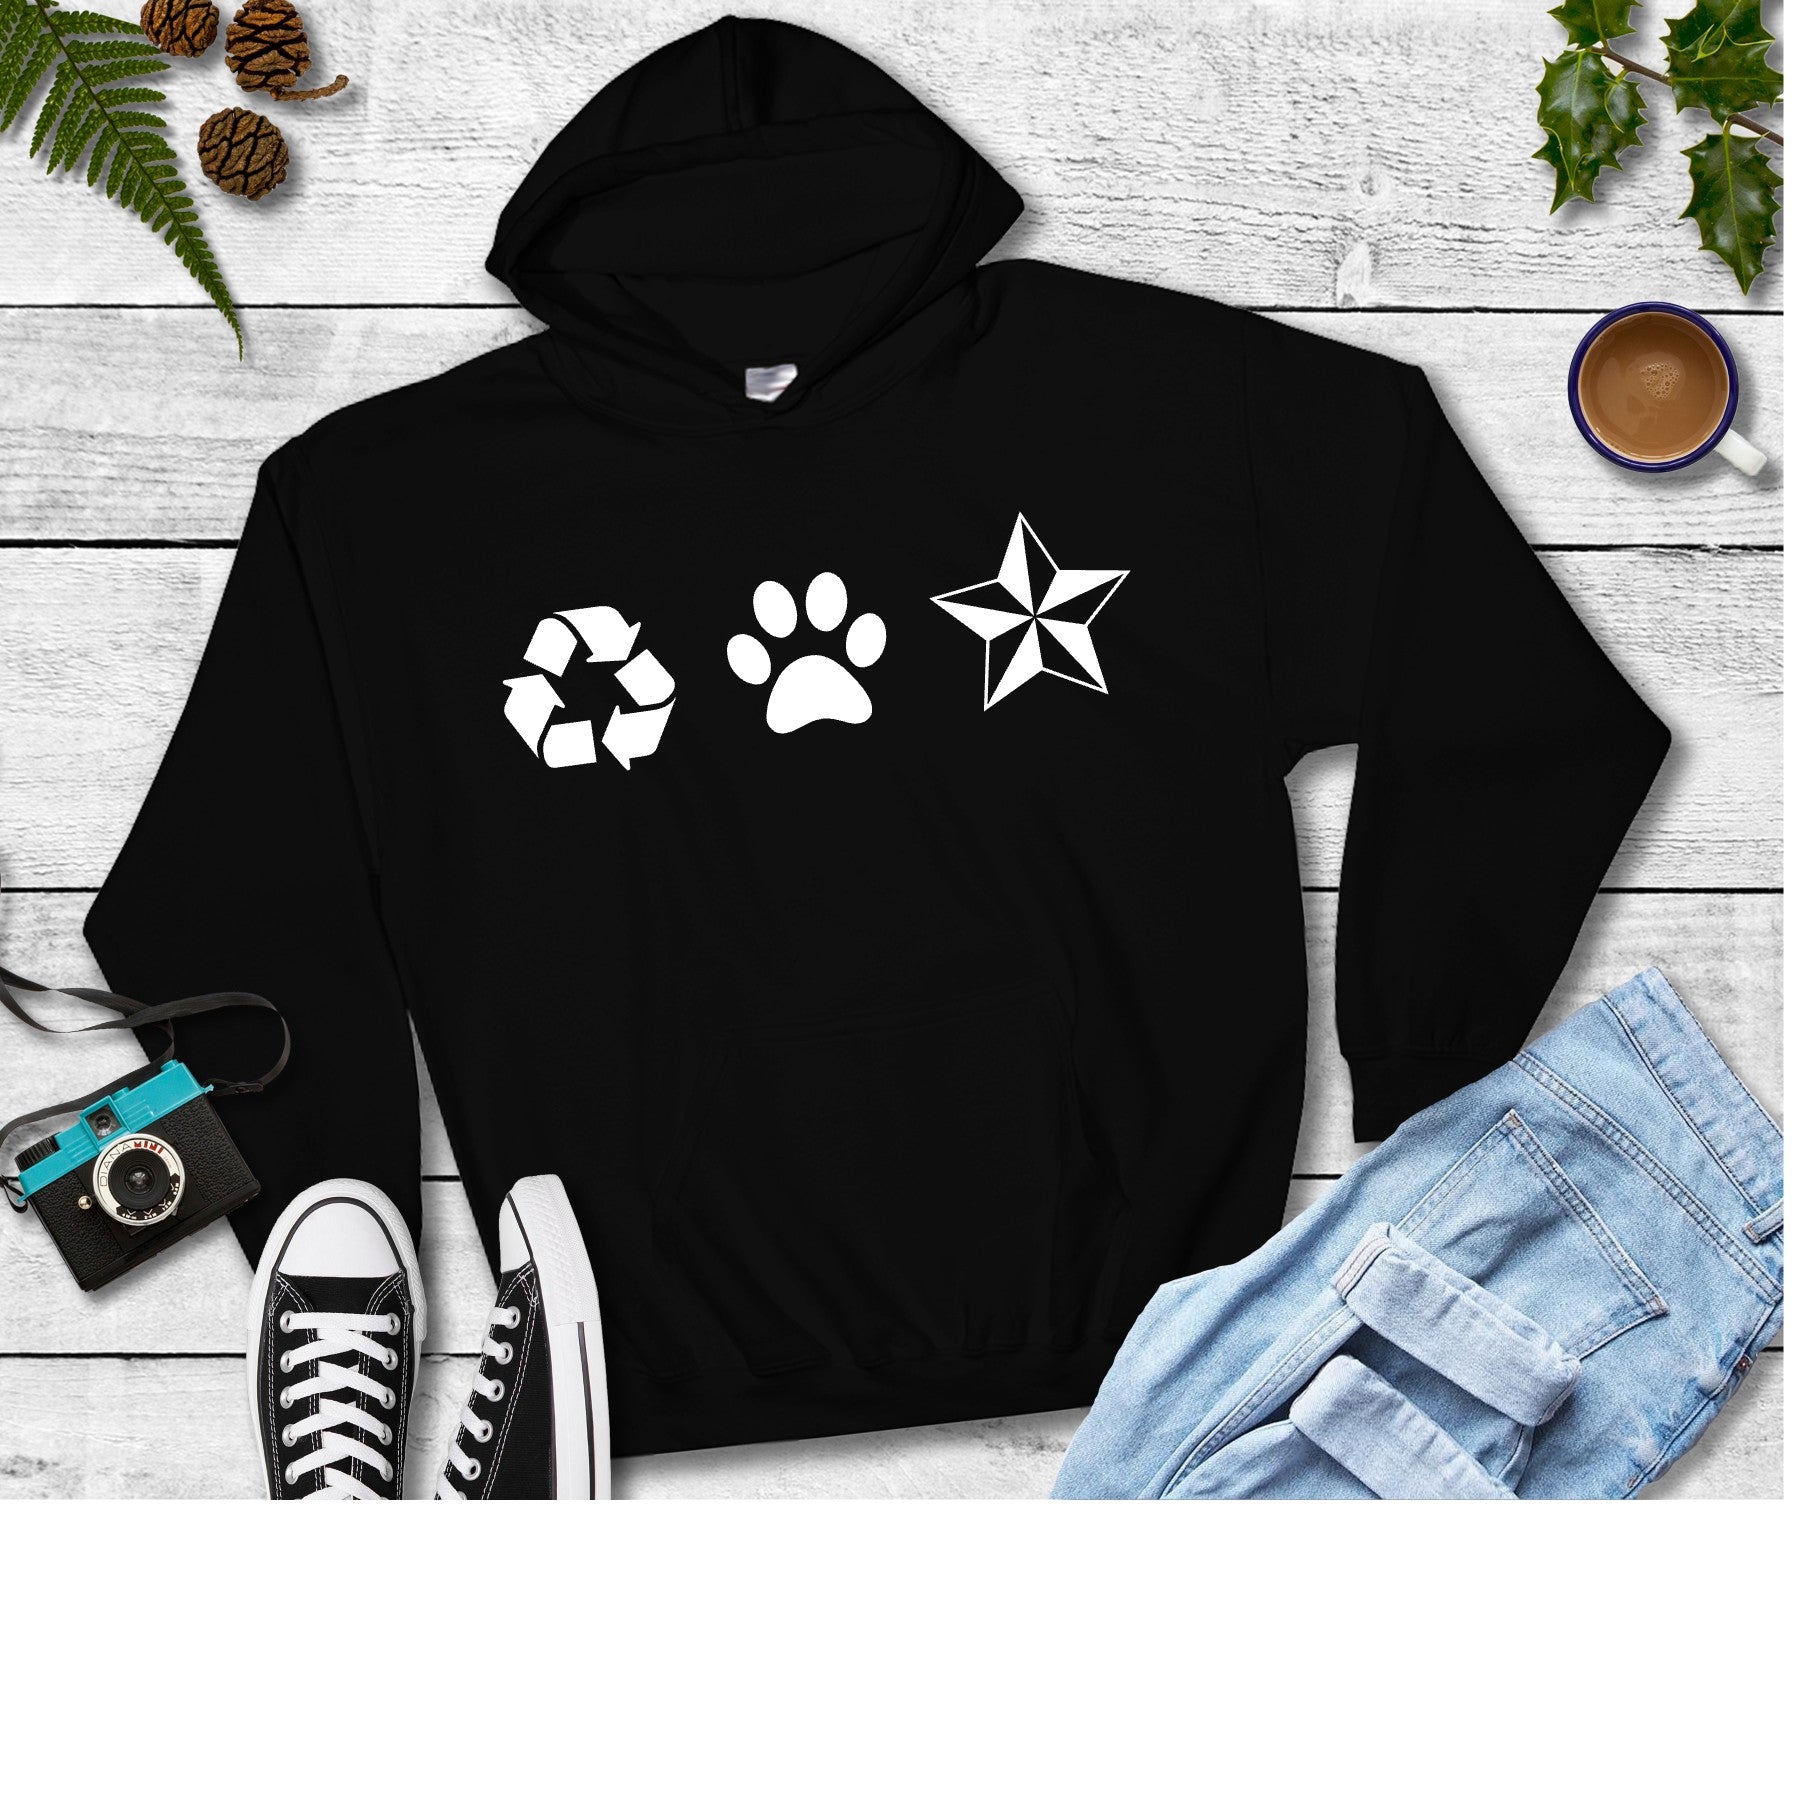 New Recycled Pets Pull Over Hoodie - Ruff Life Rescue Wear